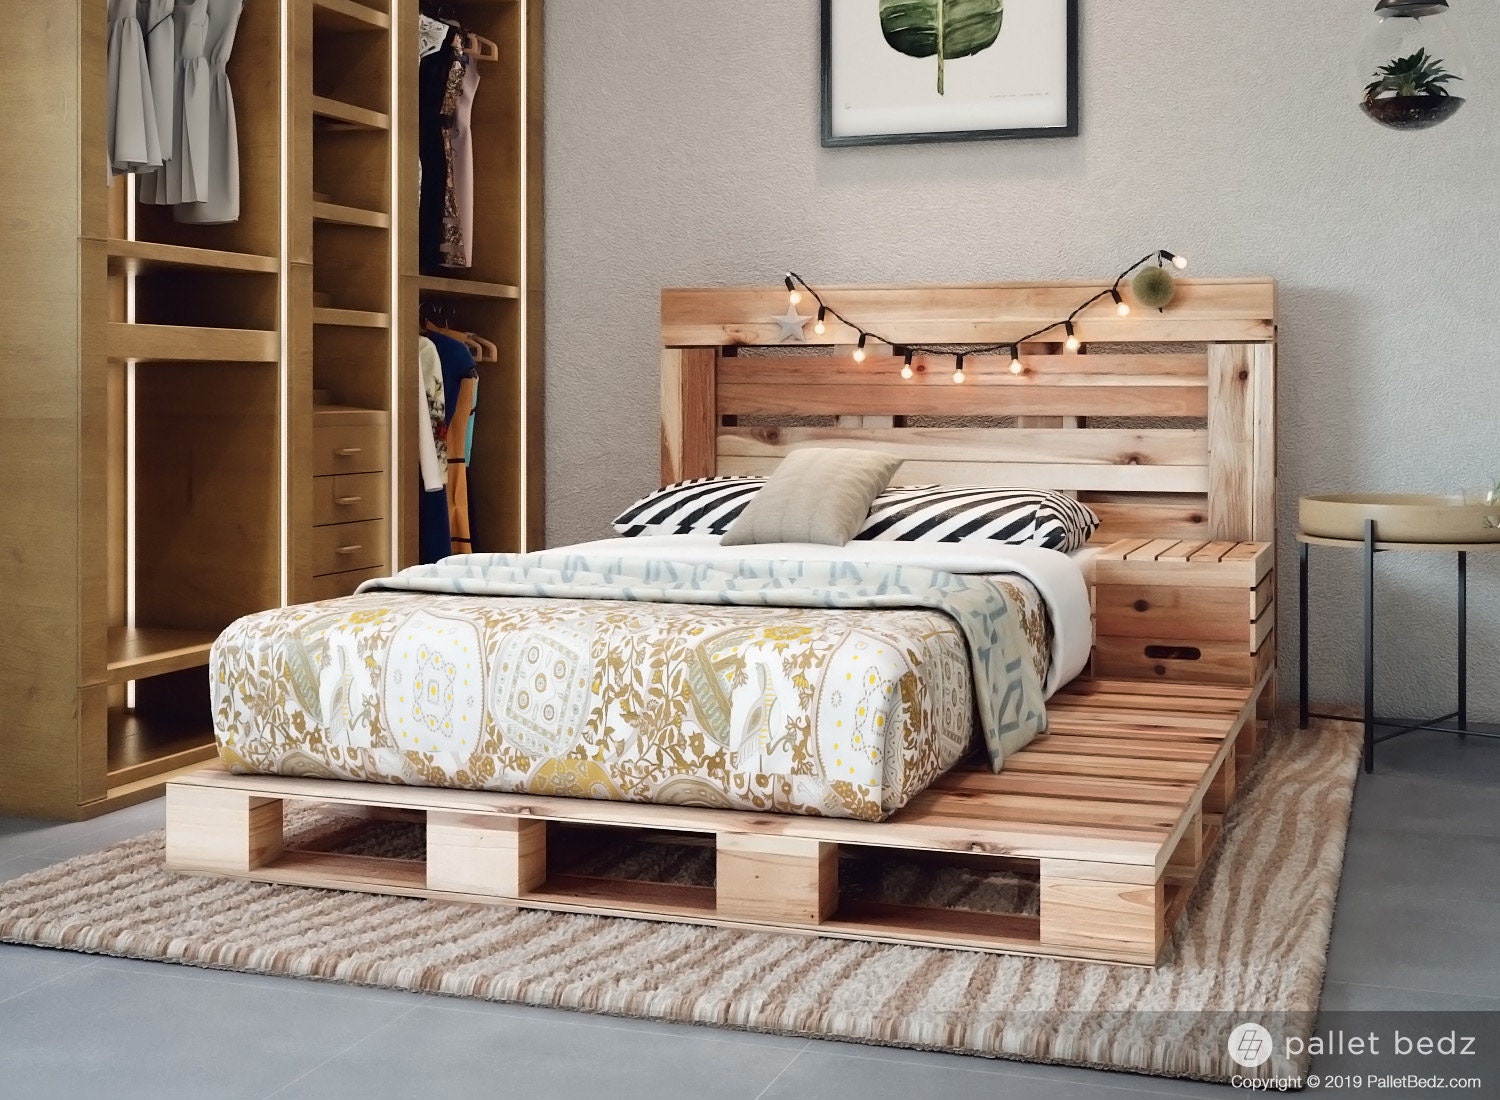 Pallet Bed The Twin Size Includes, Crate Bed Frame